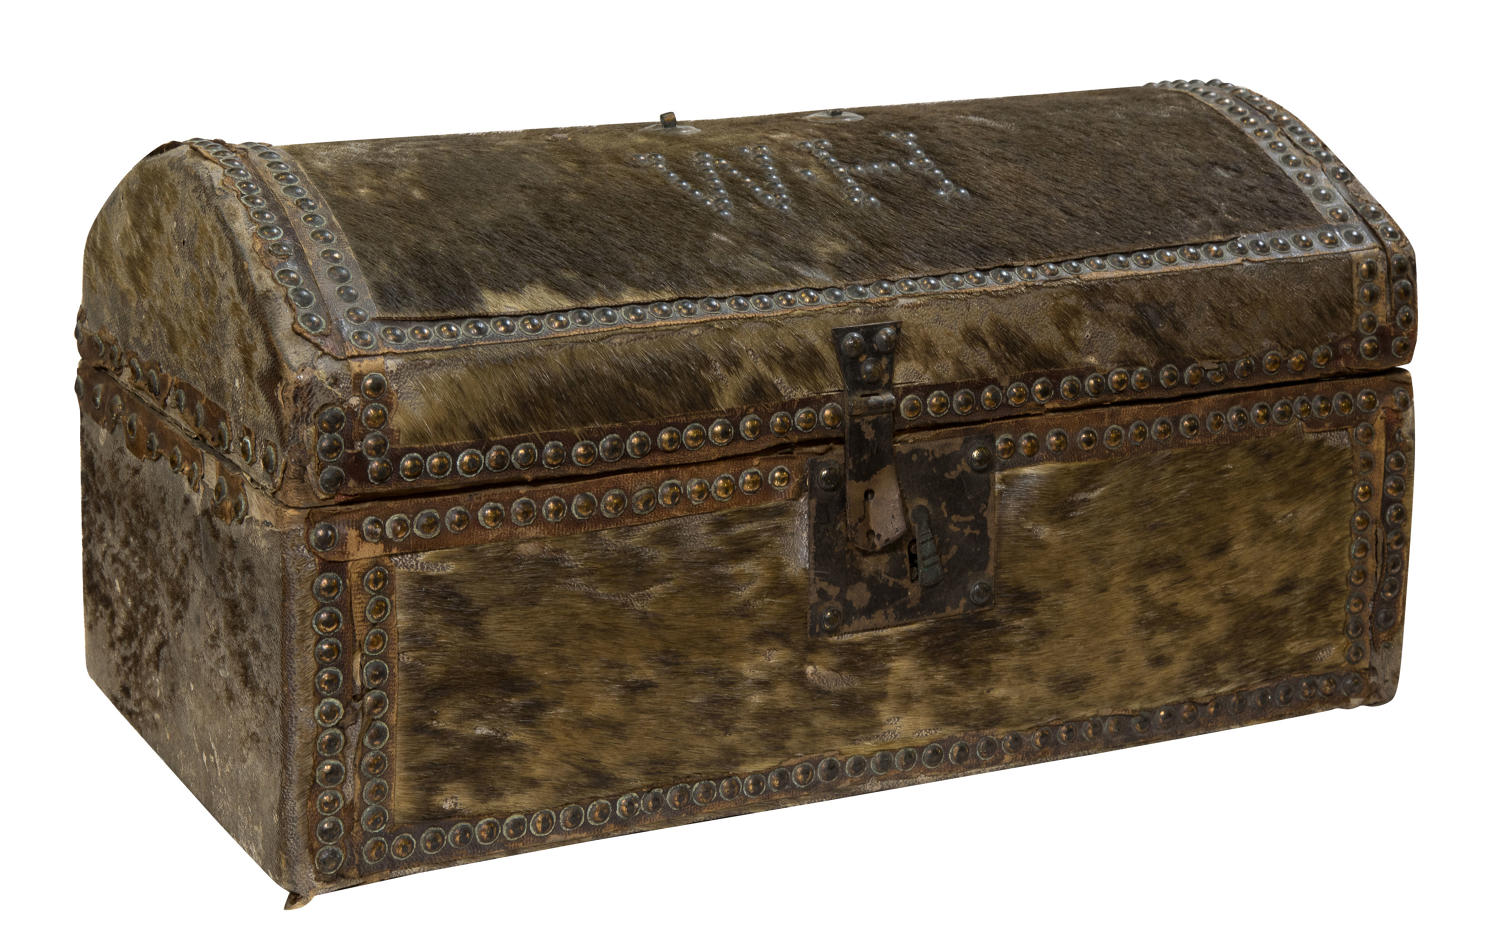 Regency Ponyskin domed travel trunk in comparatively good condition.